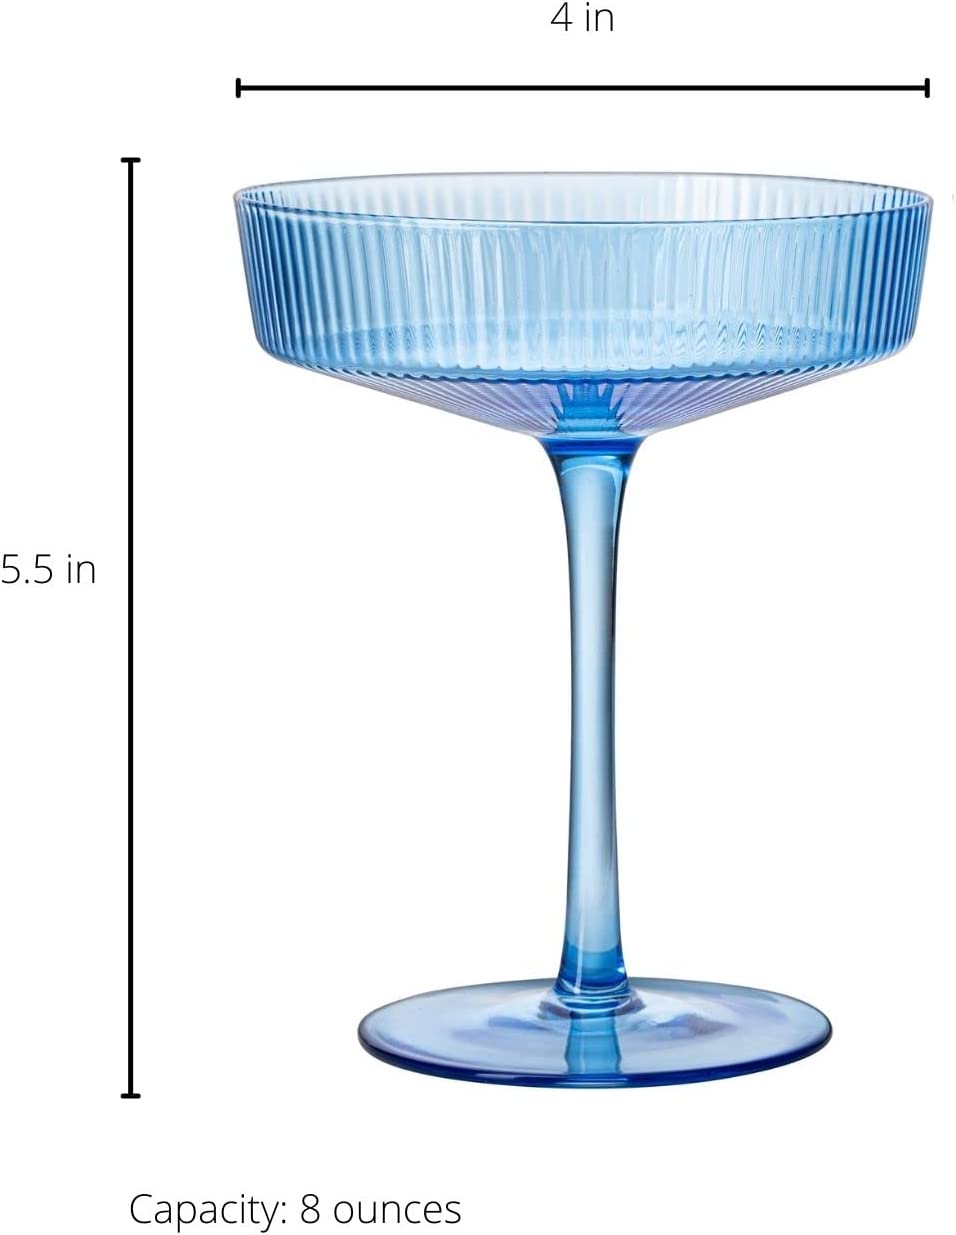 Ribbed Coupe Cocktail Glasses 8 oz | Set of 2 | Classic Manhattan Glasses For Cocktails, Champagne Coupe, Ripple Coupe Glasses, Art Deco Gatsby Vintage, Crystal with Stems (Blue, Set of 2) by The Wine Savant